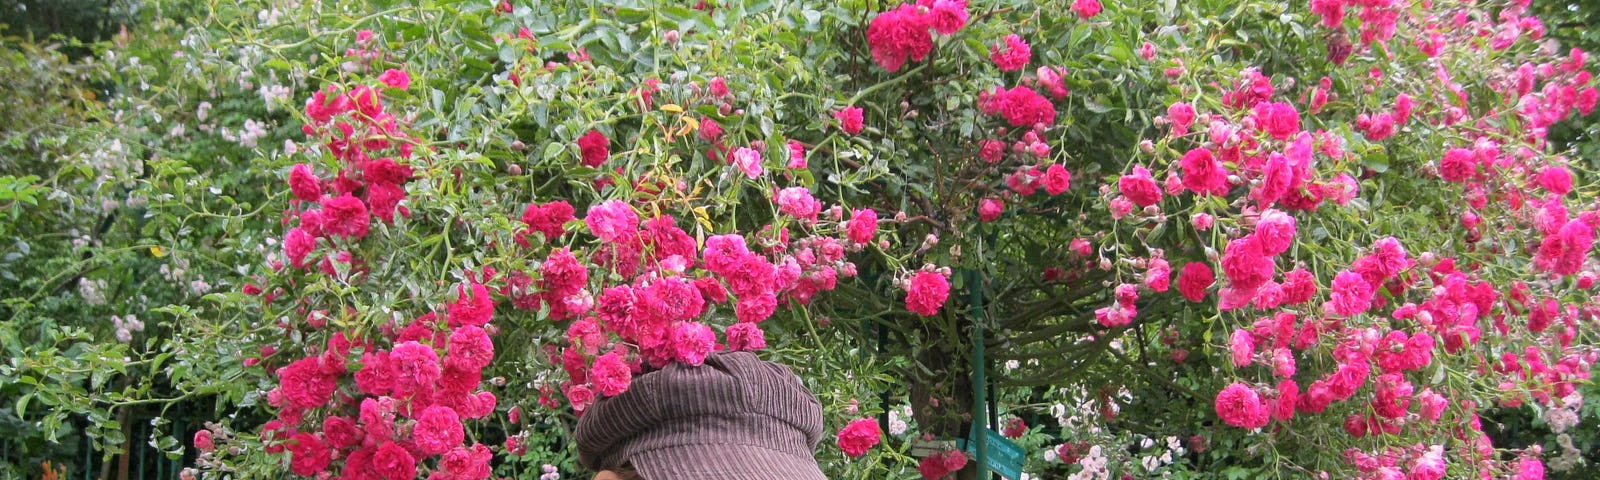 Photo of the author wearing the hat in question in Monet’s garden, Giverny, France 2011